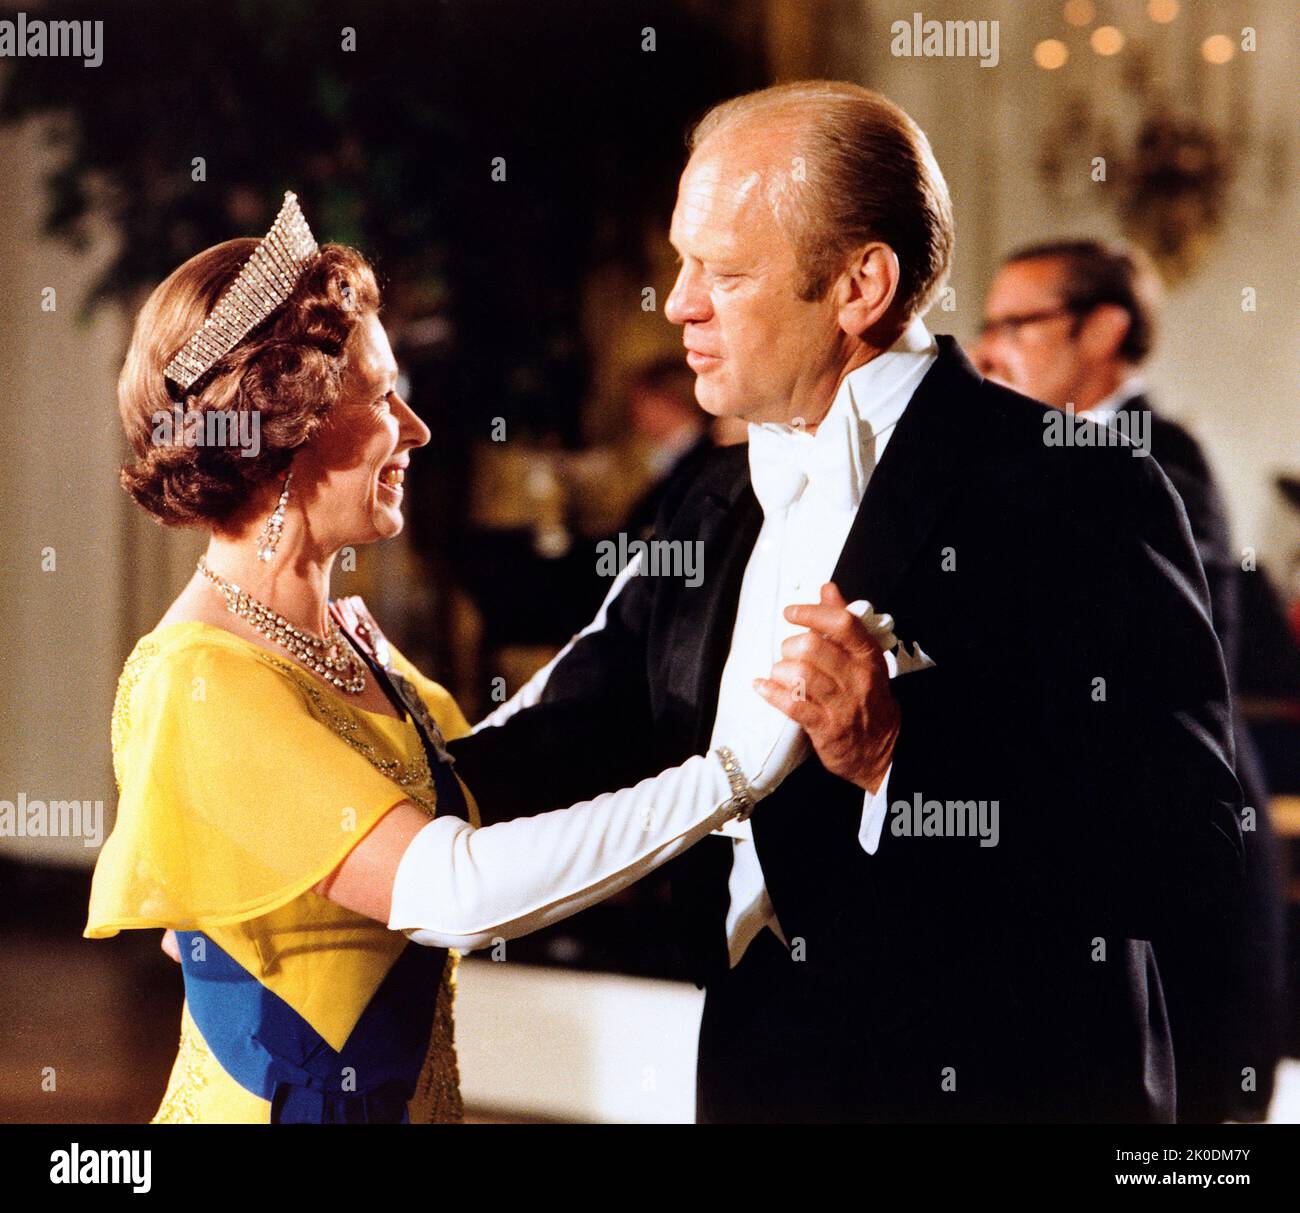 Photograph of President Gerald Ford dancing with Queen Elizabeth II during a State Dinner held in her honor - 7th July 1976 Stock Photo